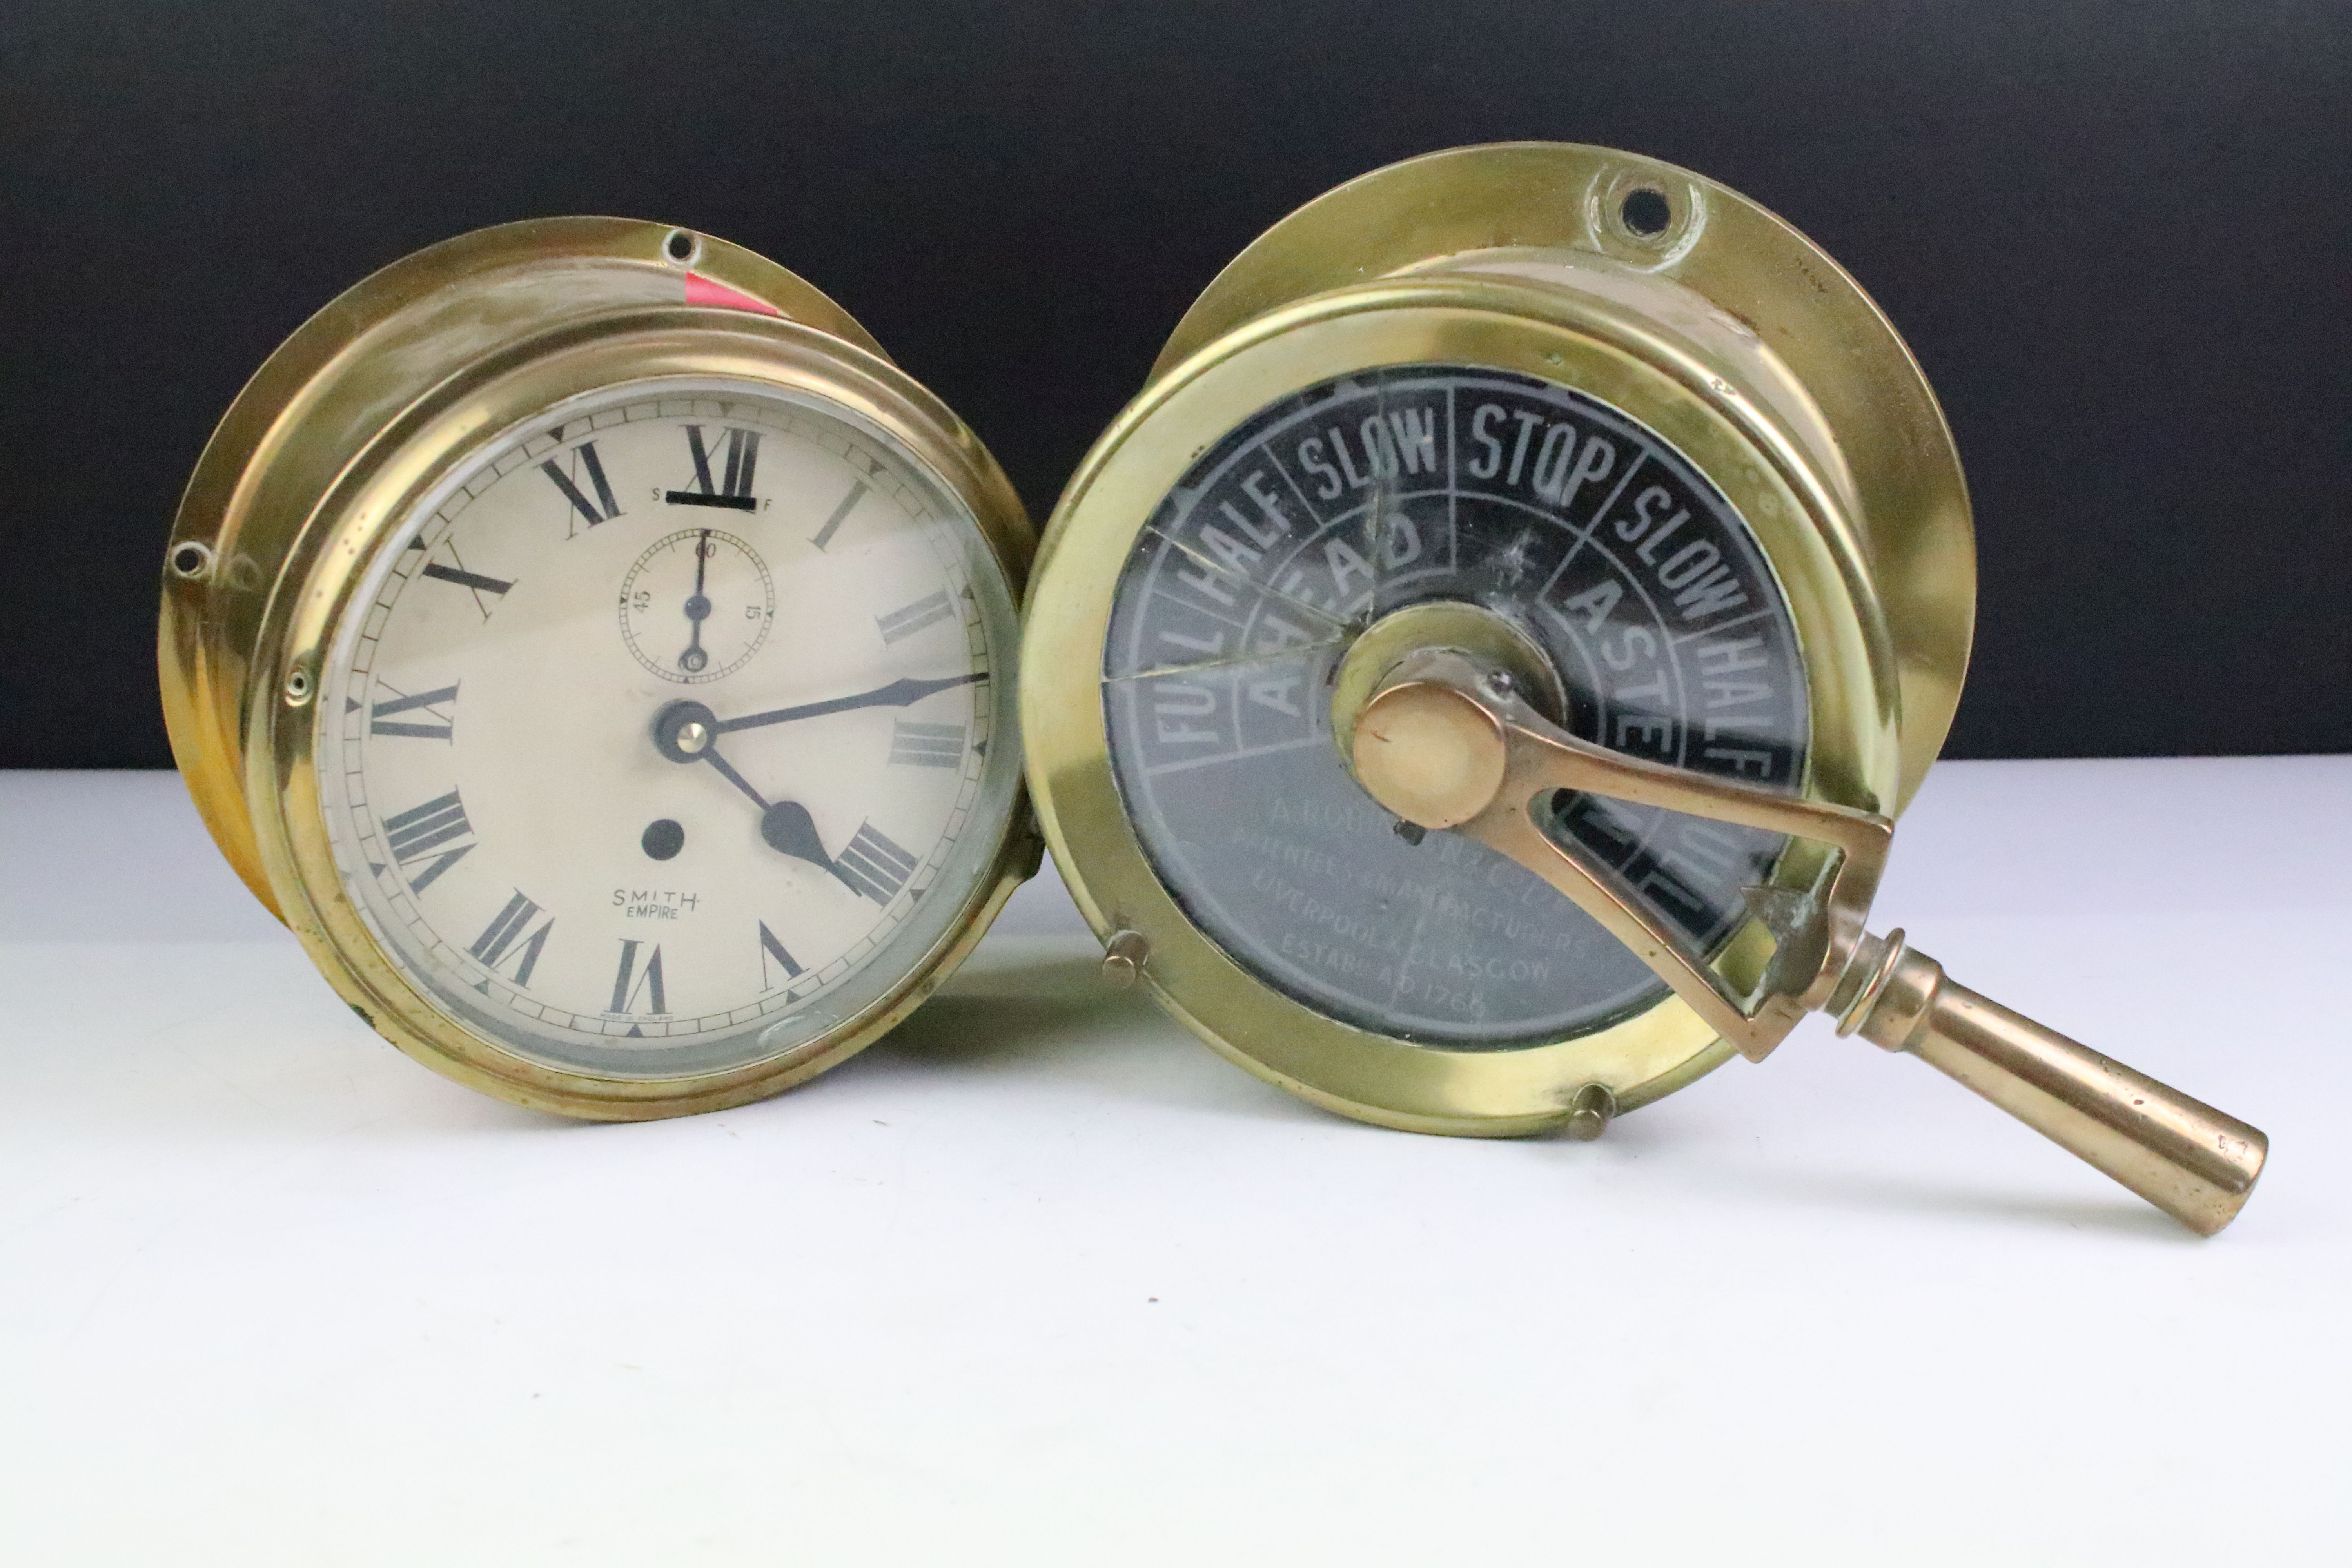 Early 20th Century A Robinson & Co brass cased ships telegraph together with a Smiths Empire brass